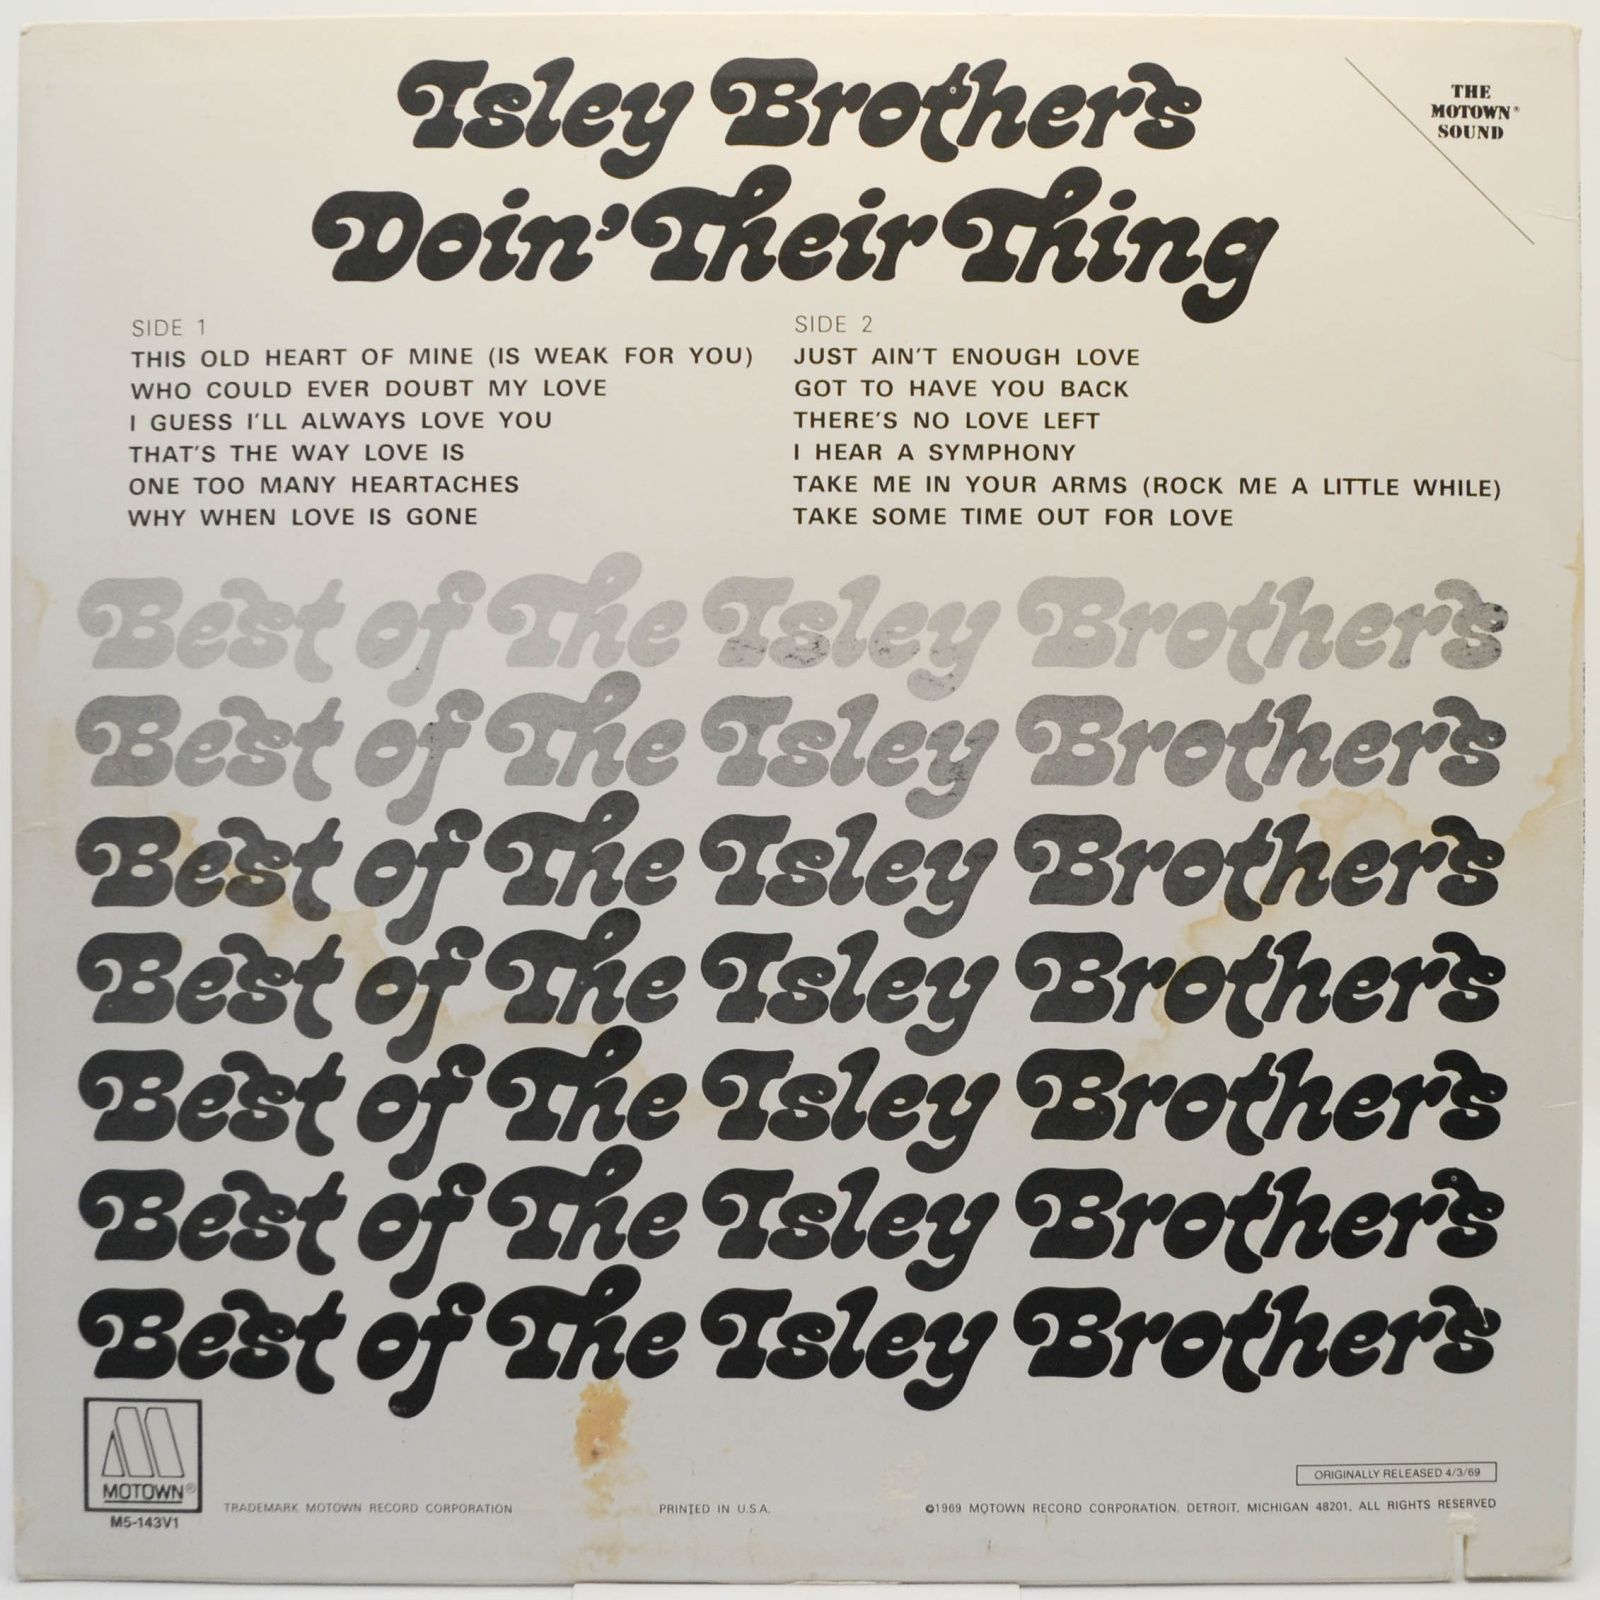 Isley Brothers — Doin’ Their Thing, 1981